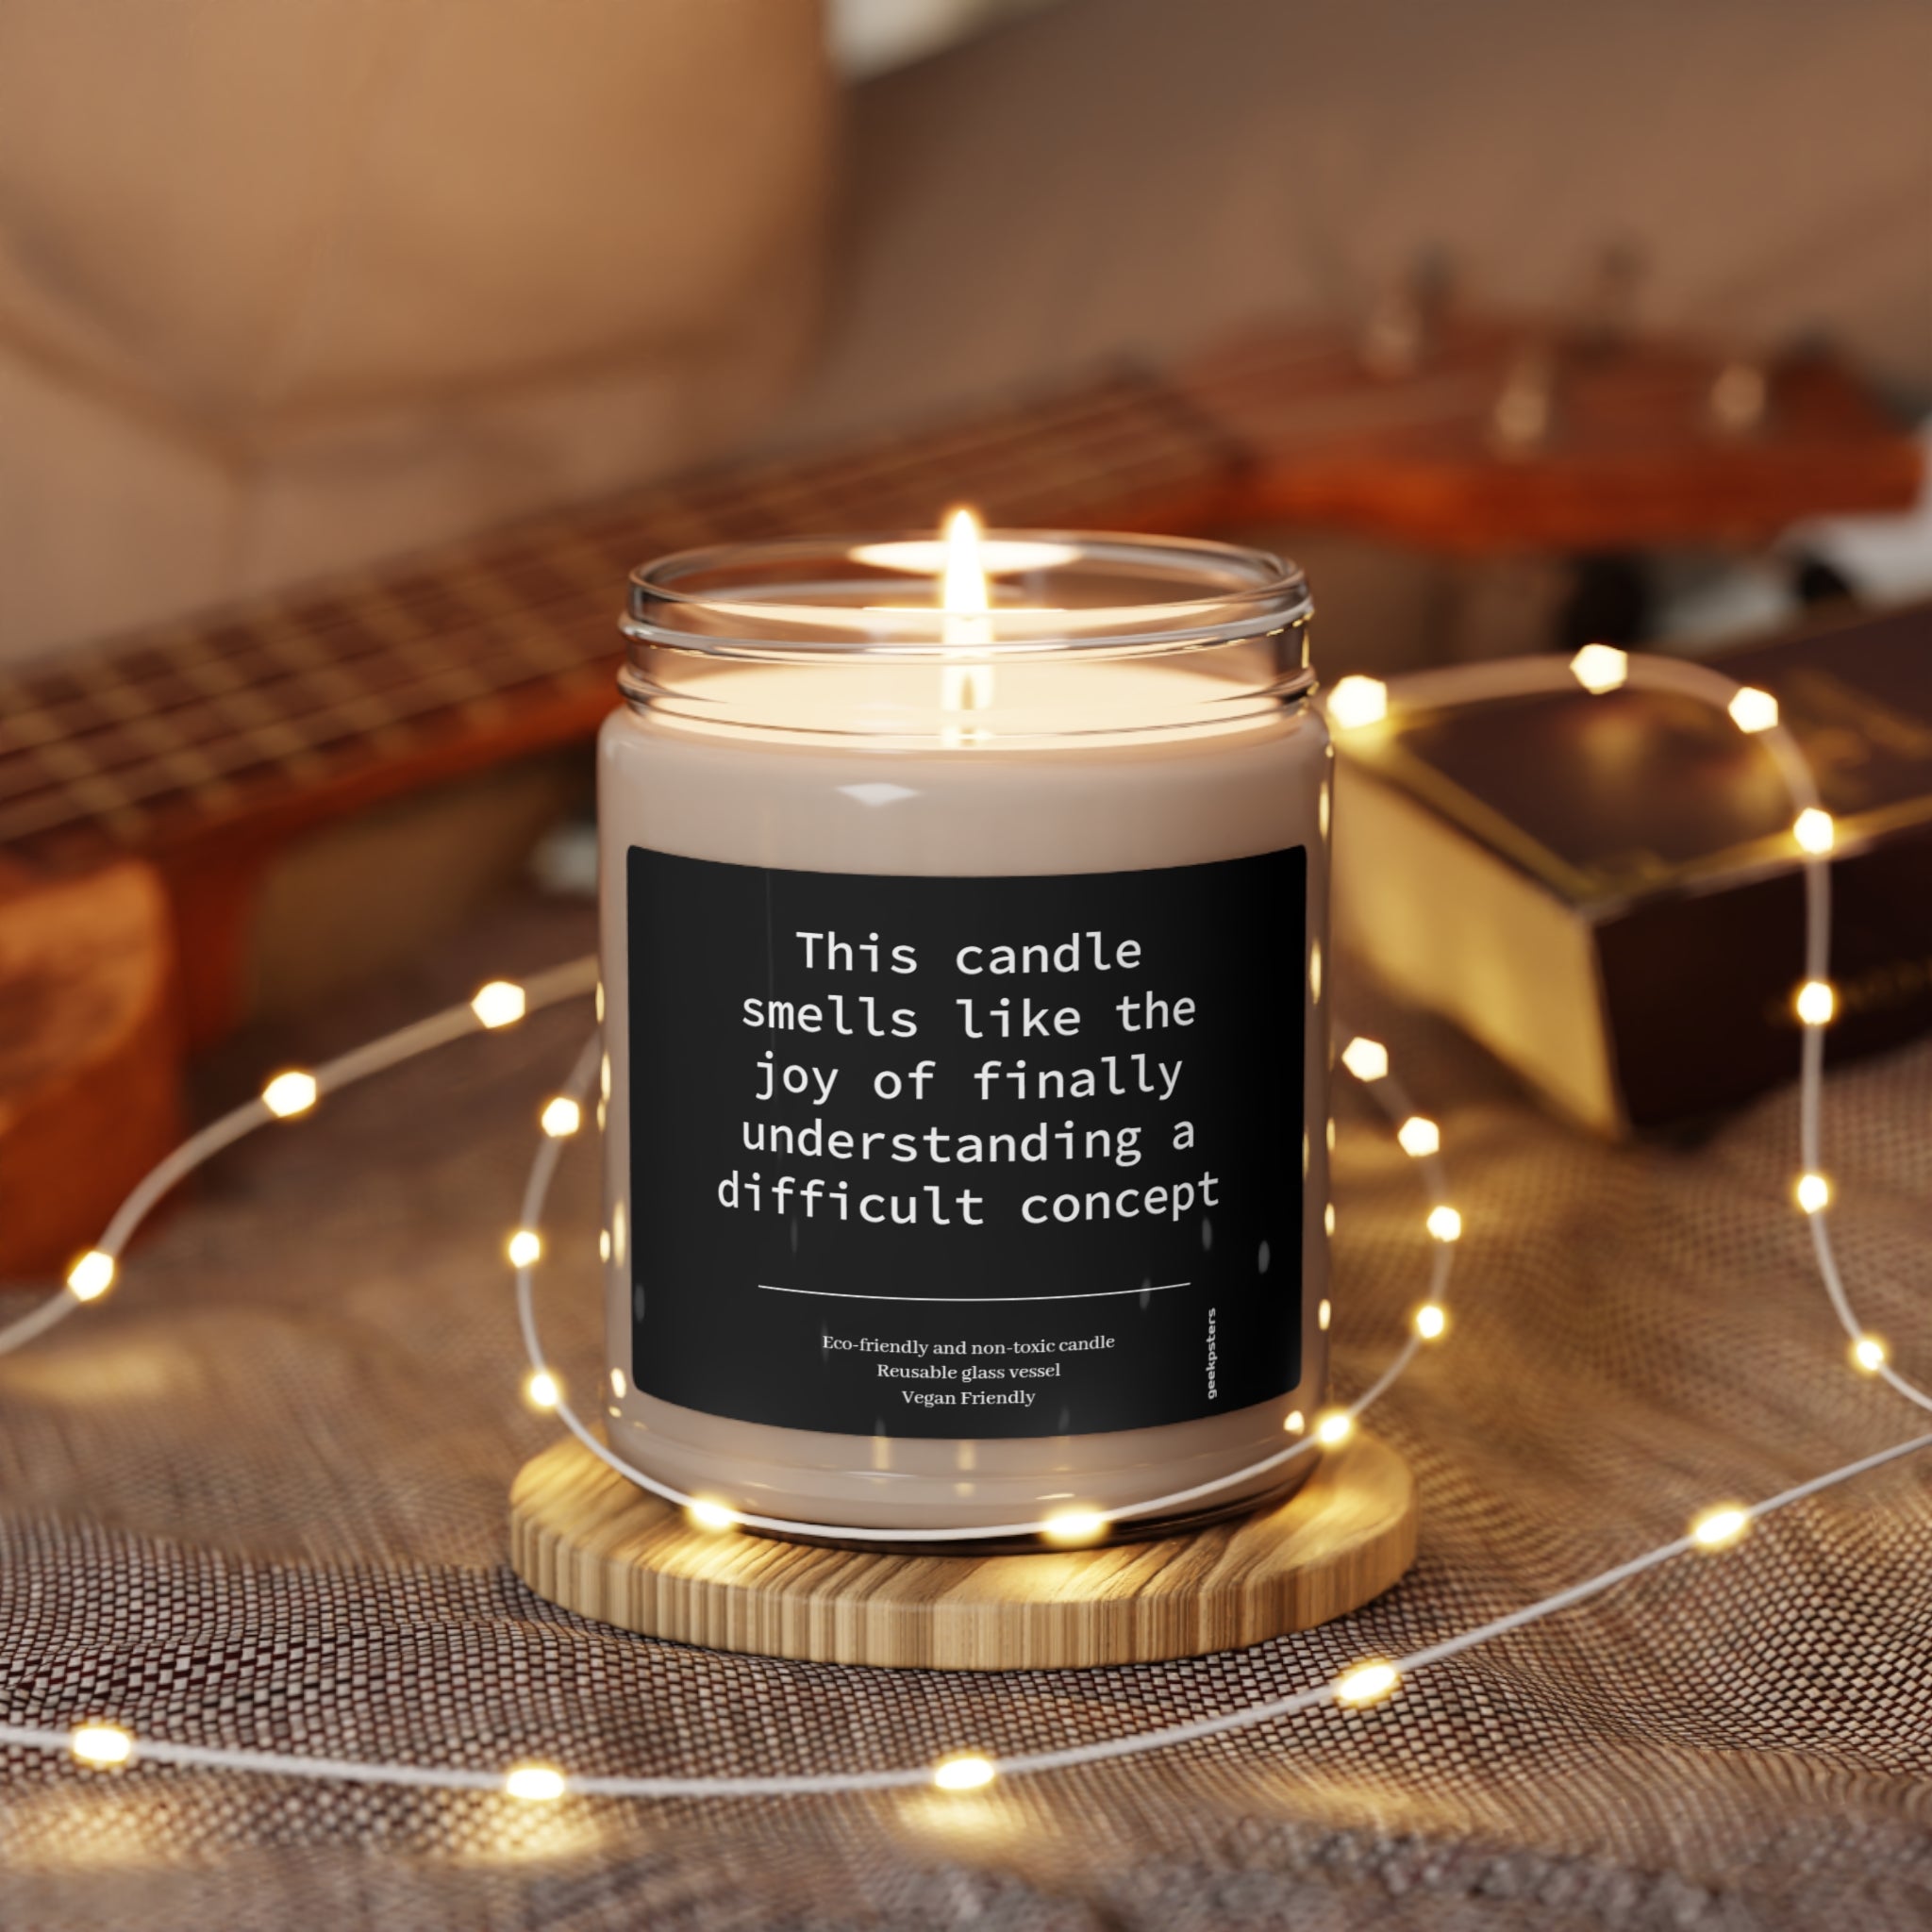 A lit soy candle on a wooden holder with a label reading "This Candle Smells Like the Joy of Finally Understanding a Difficult Concept," surrounded by string lights and a blurred background.